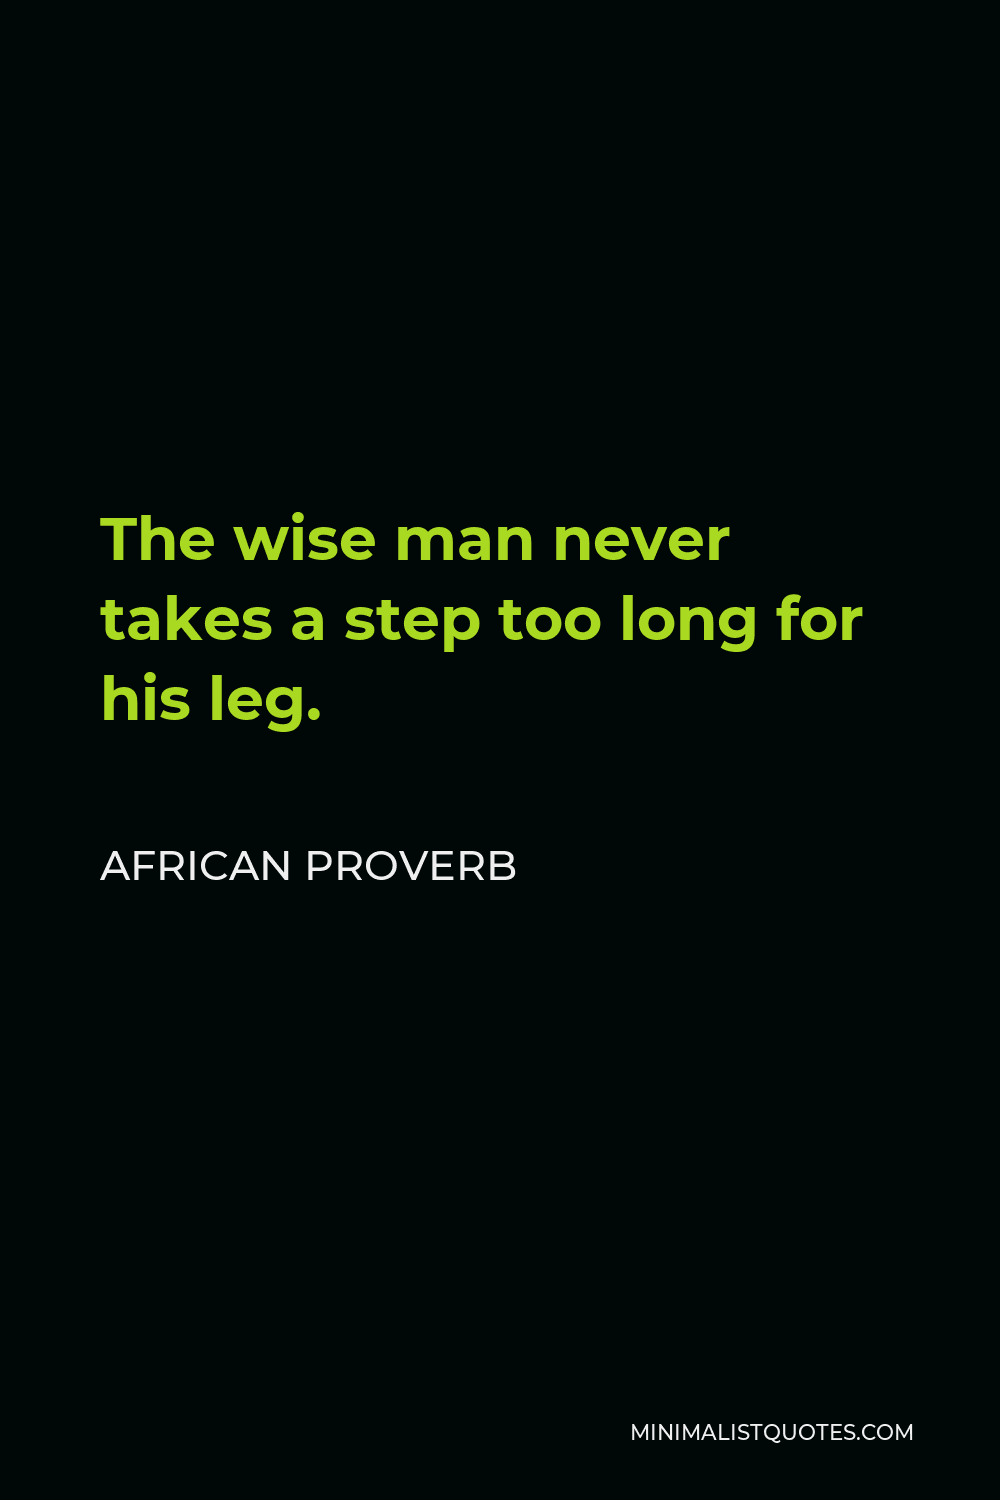 African Proverb Quote - The wise man never takes a step too long for his leg.